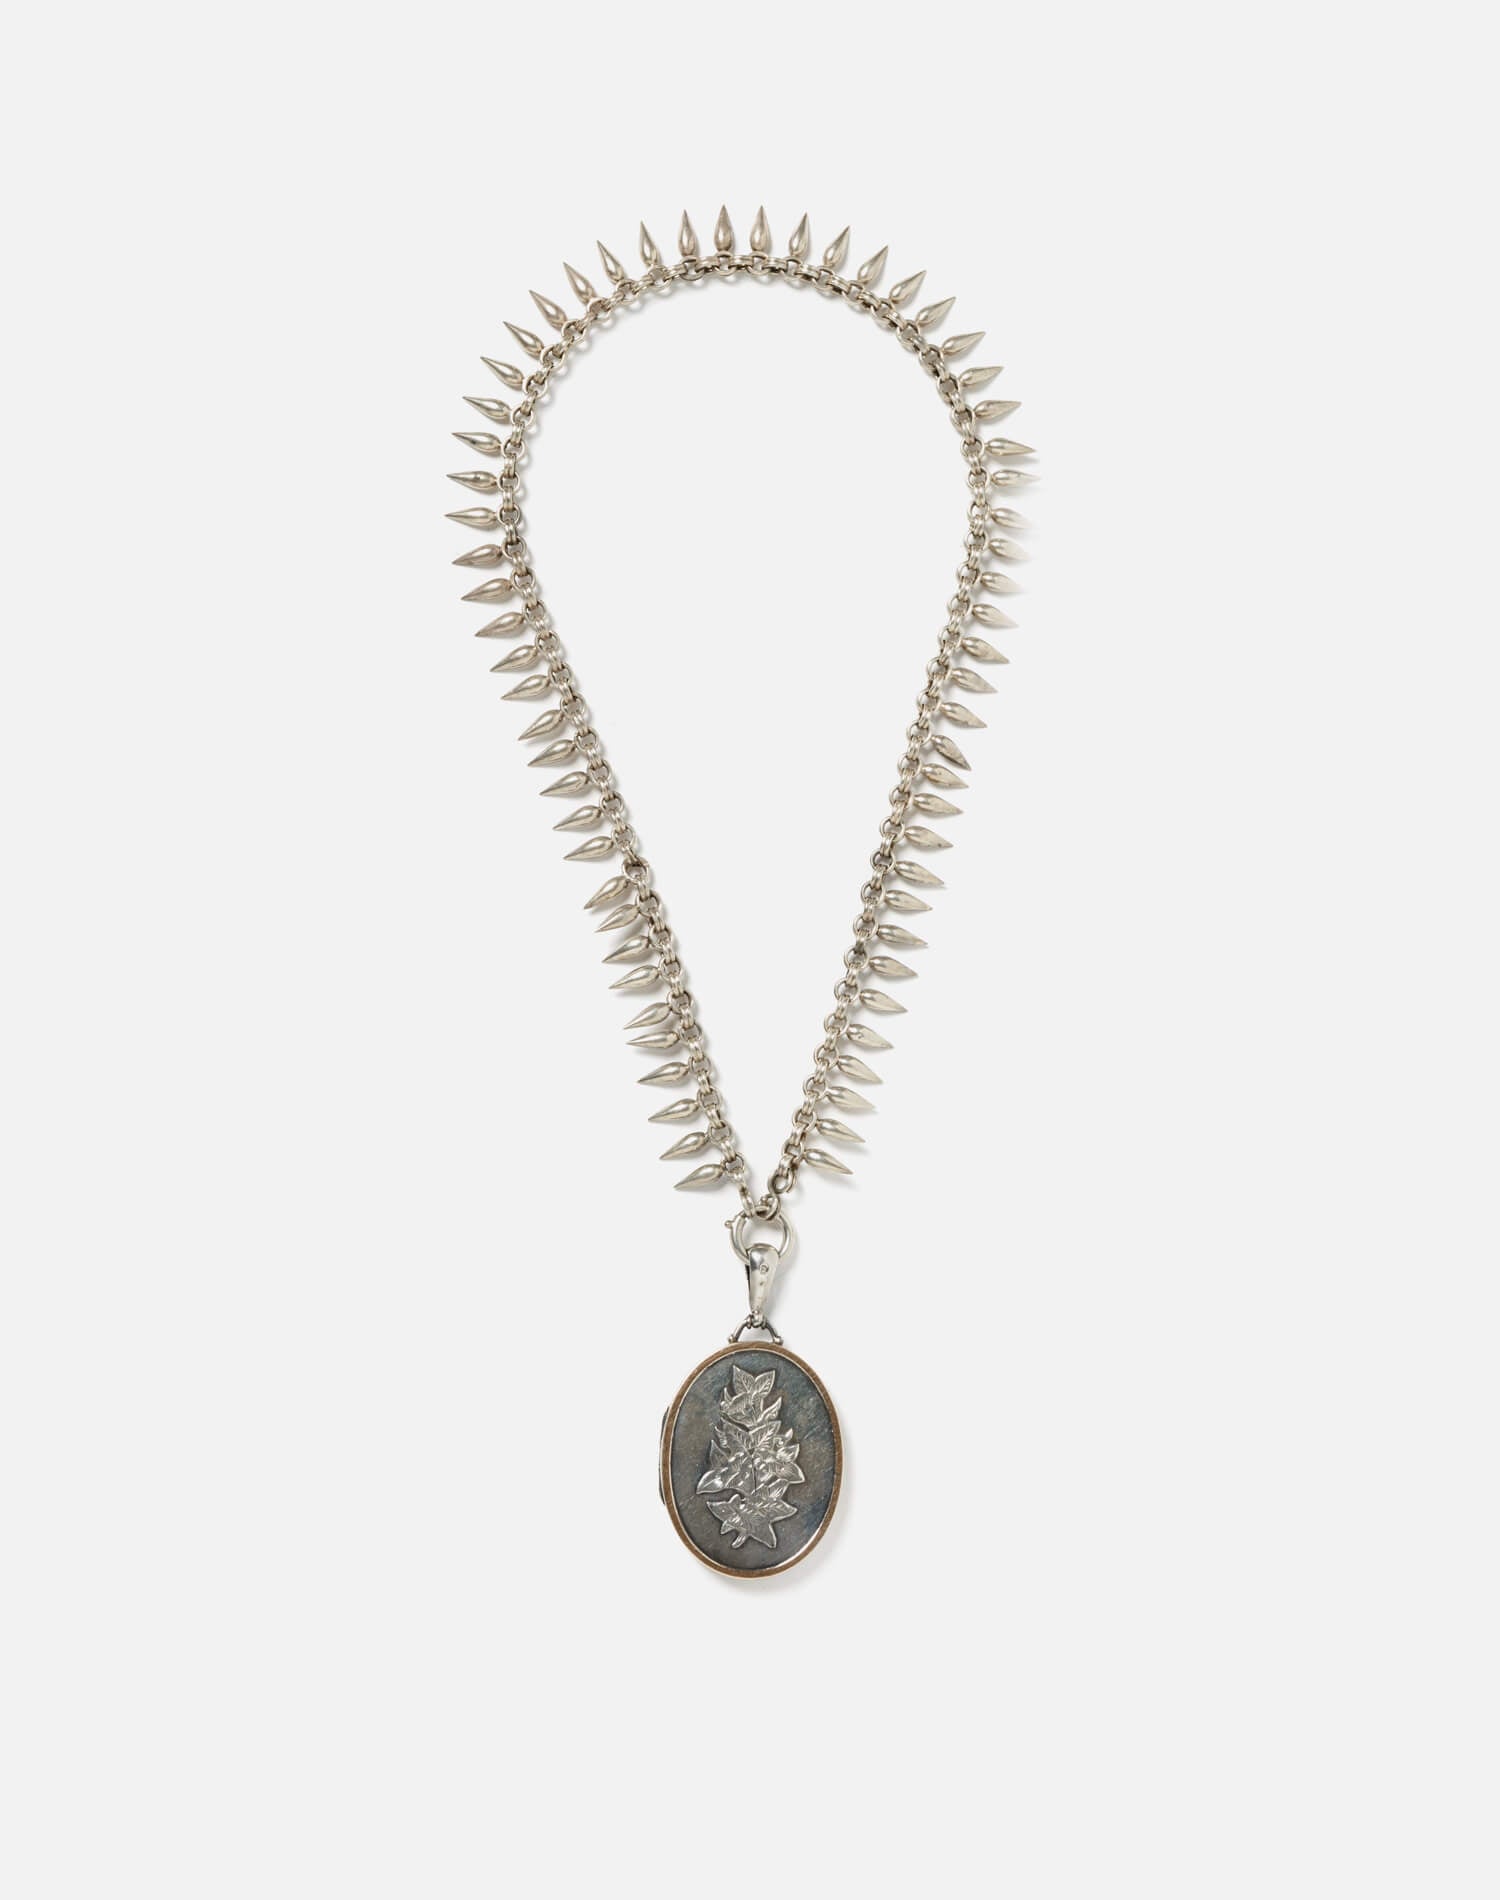 1882 Toothed Silver Necklace